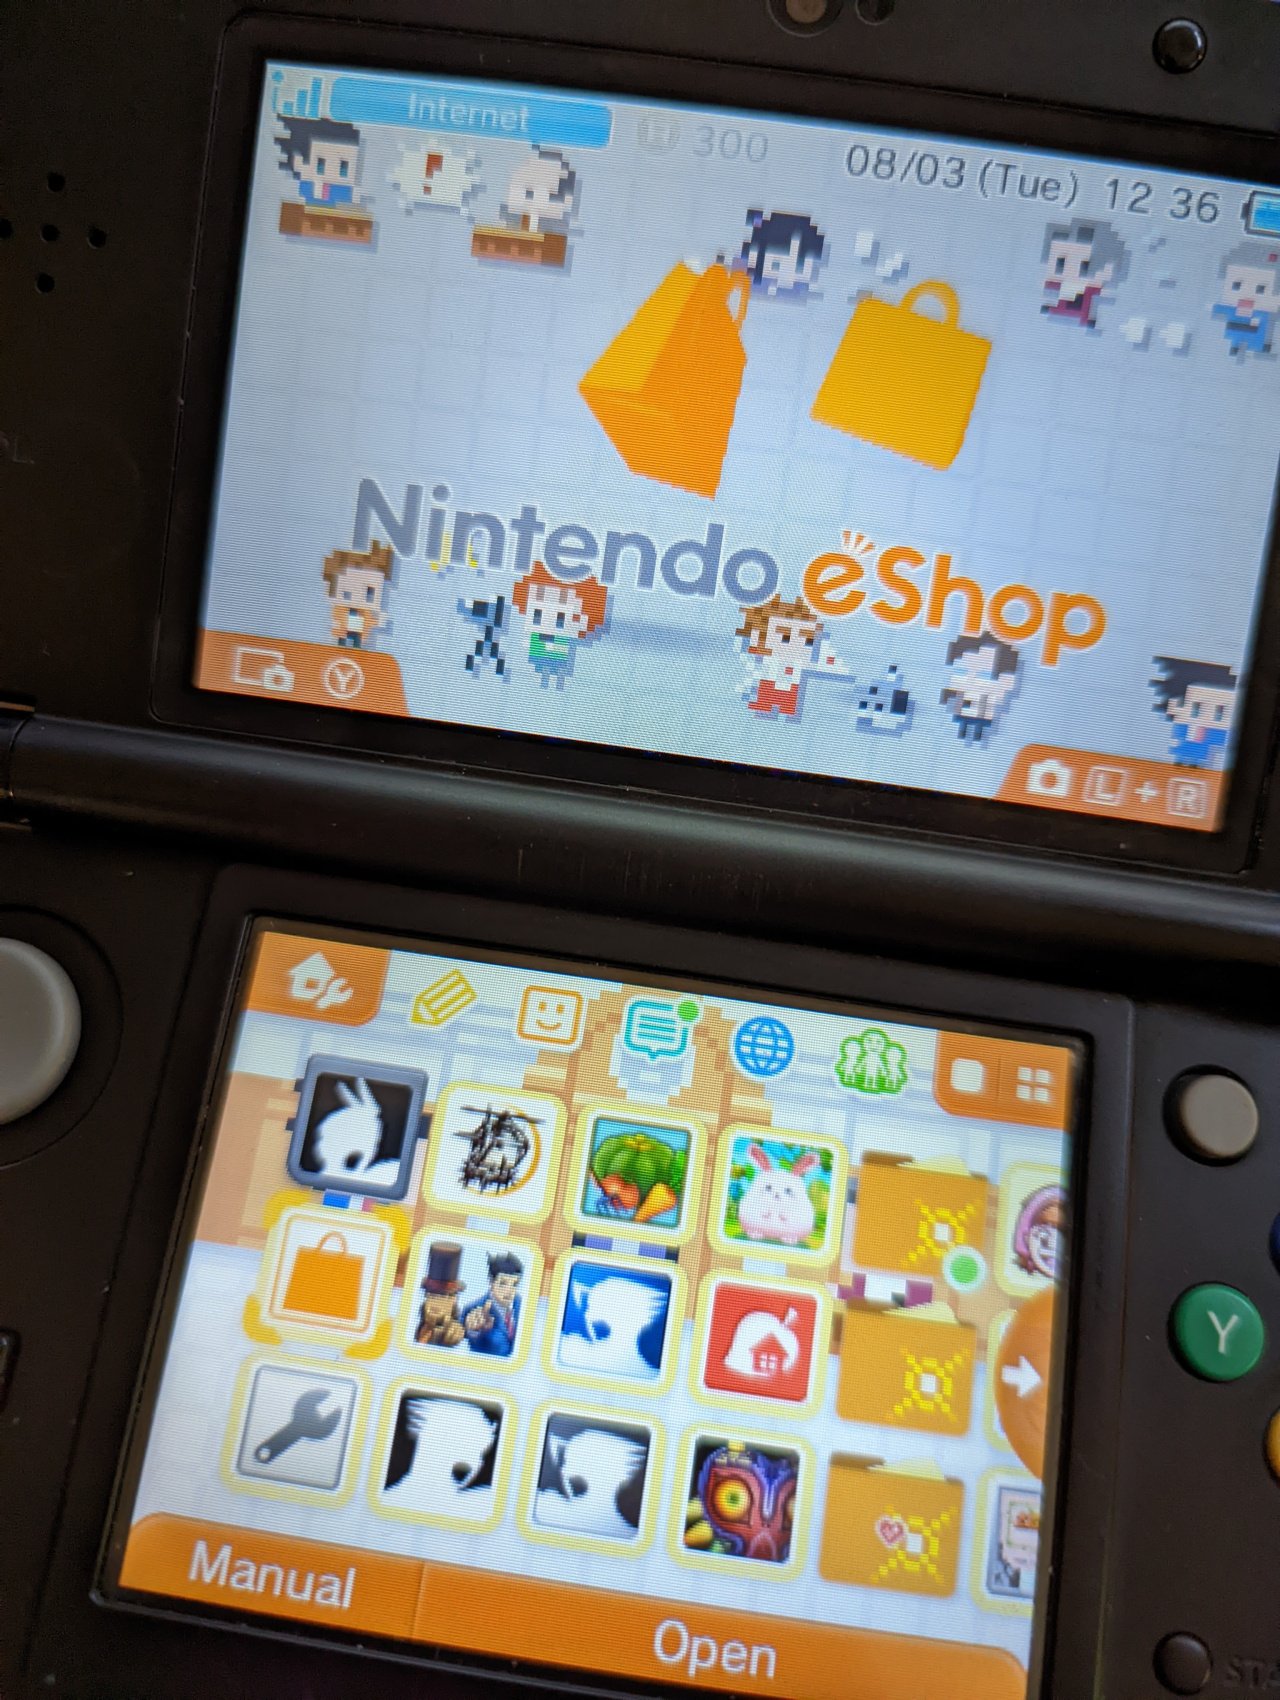 How Redownload Games From 3DS eShop - Downloading Digital Games You Already Own | Nintendo Life